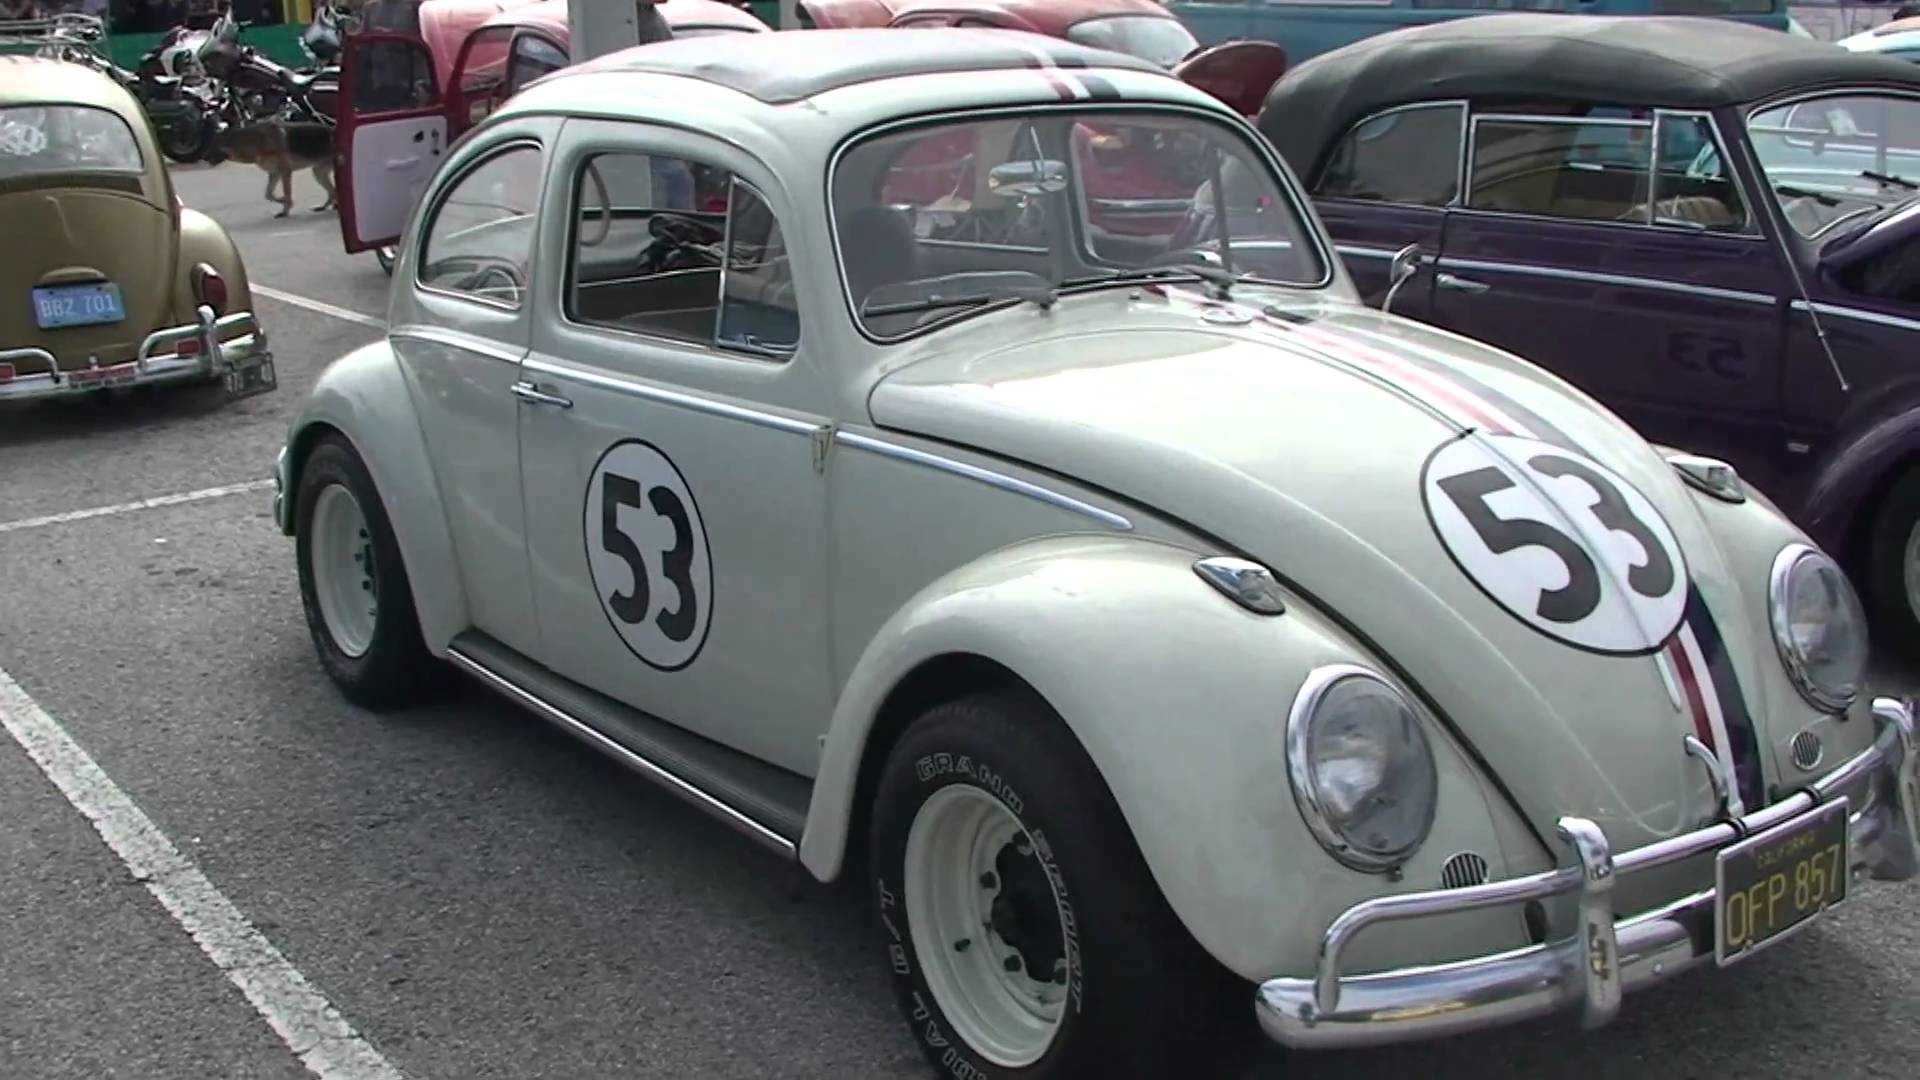 HERBIE THE LOVE BUG AT VW SHOW IN FLORIDA